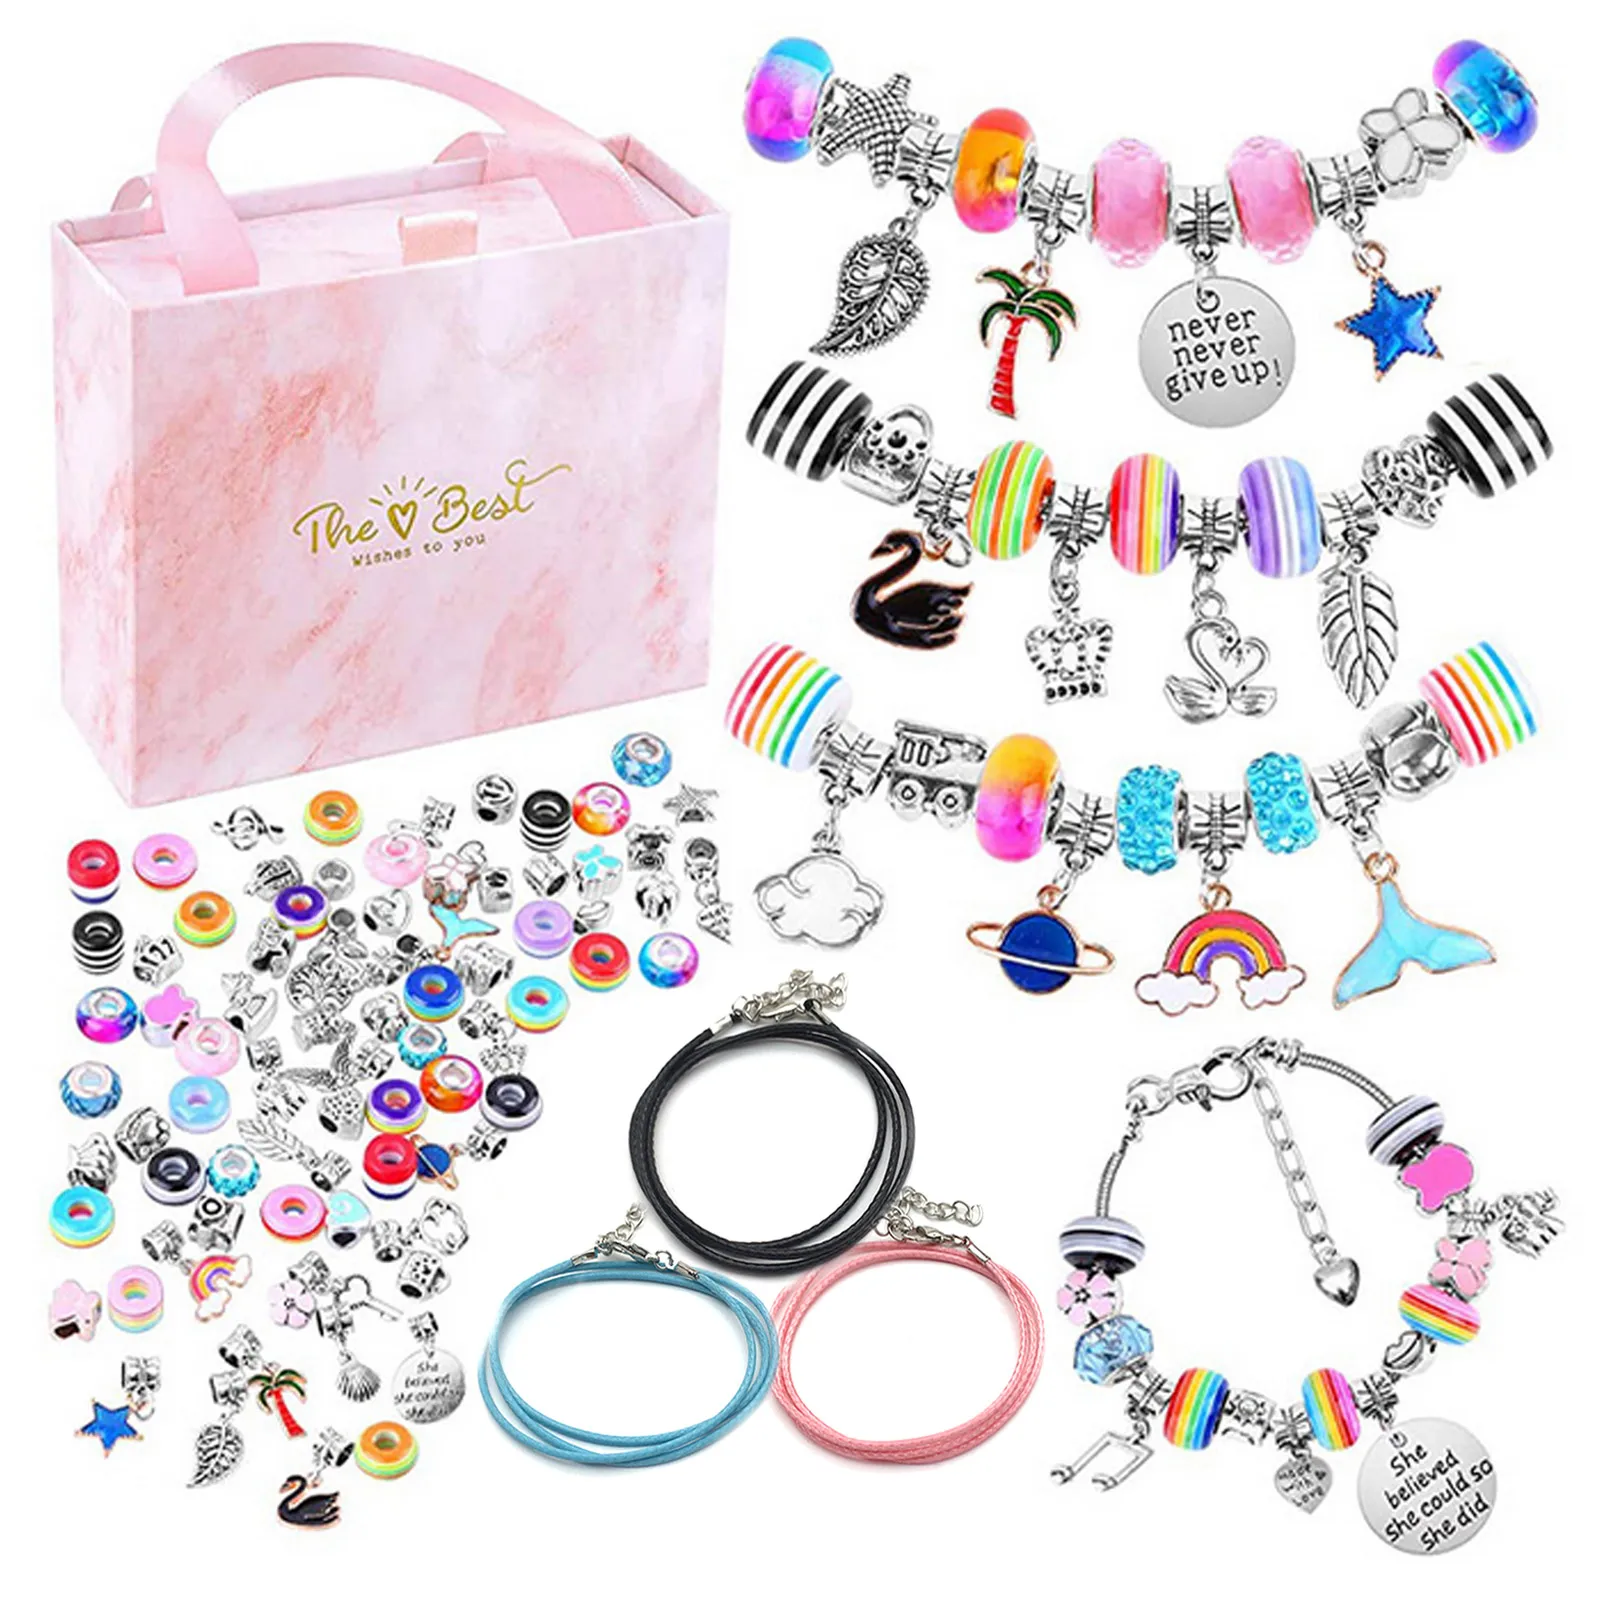 92 PCS DIY Charm Bracelet Necklaces Jewelry Making Kit with Pink